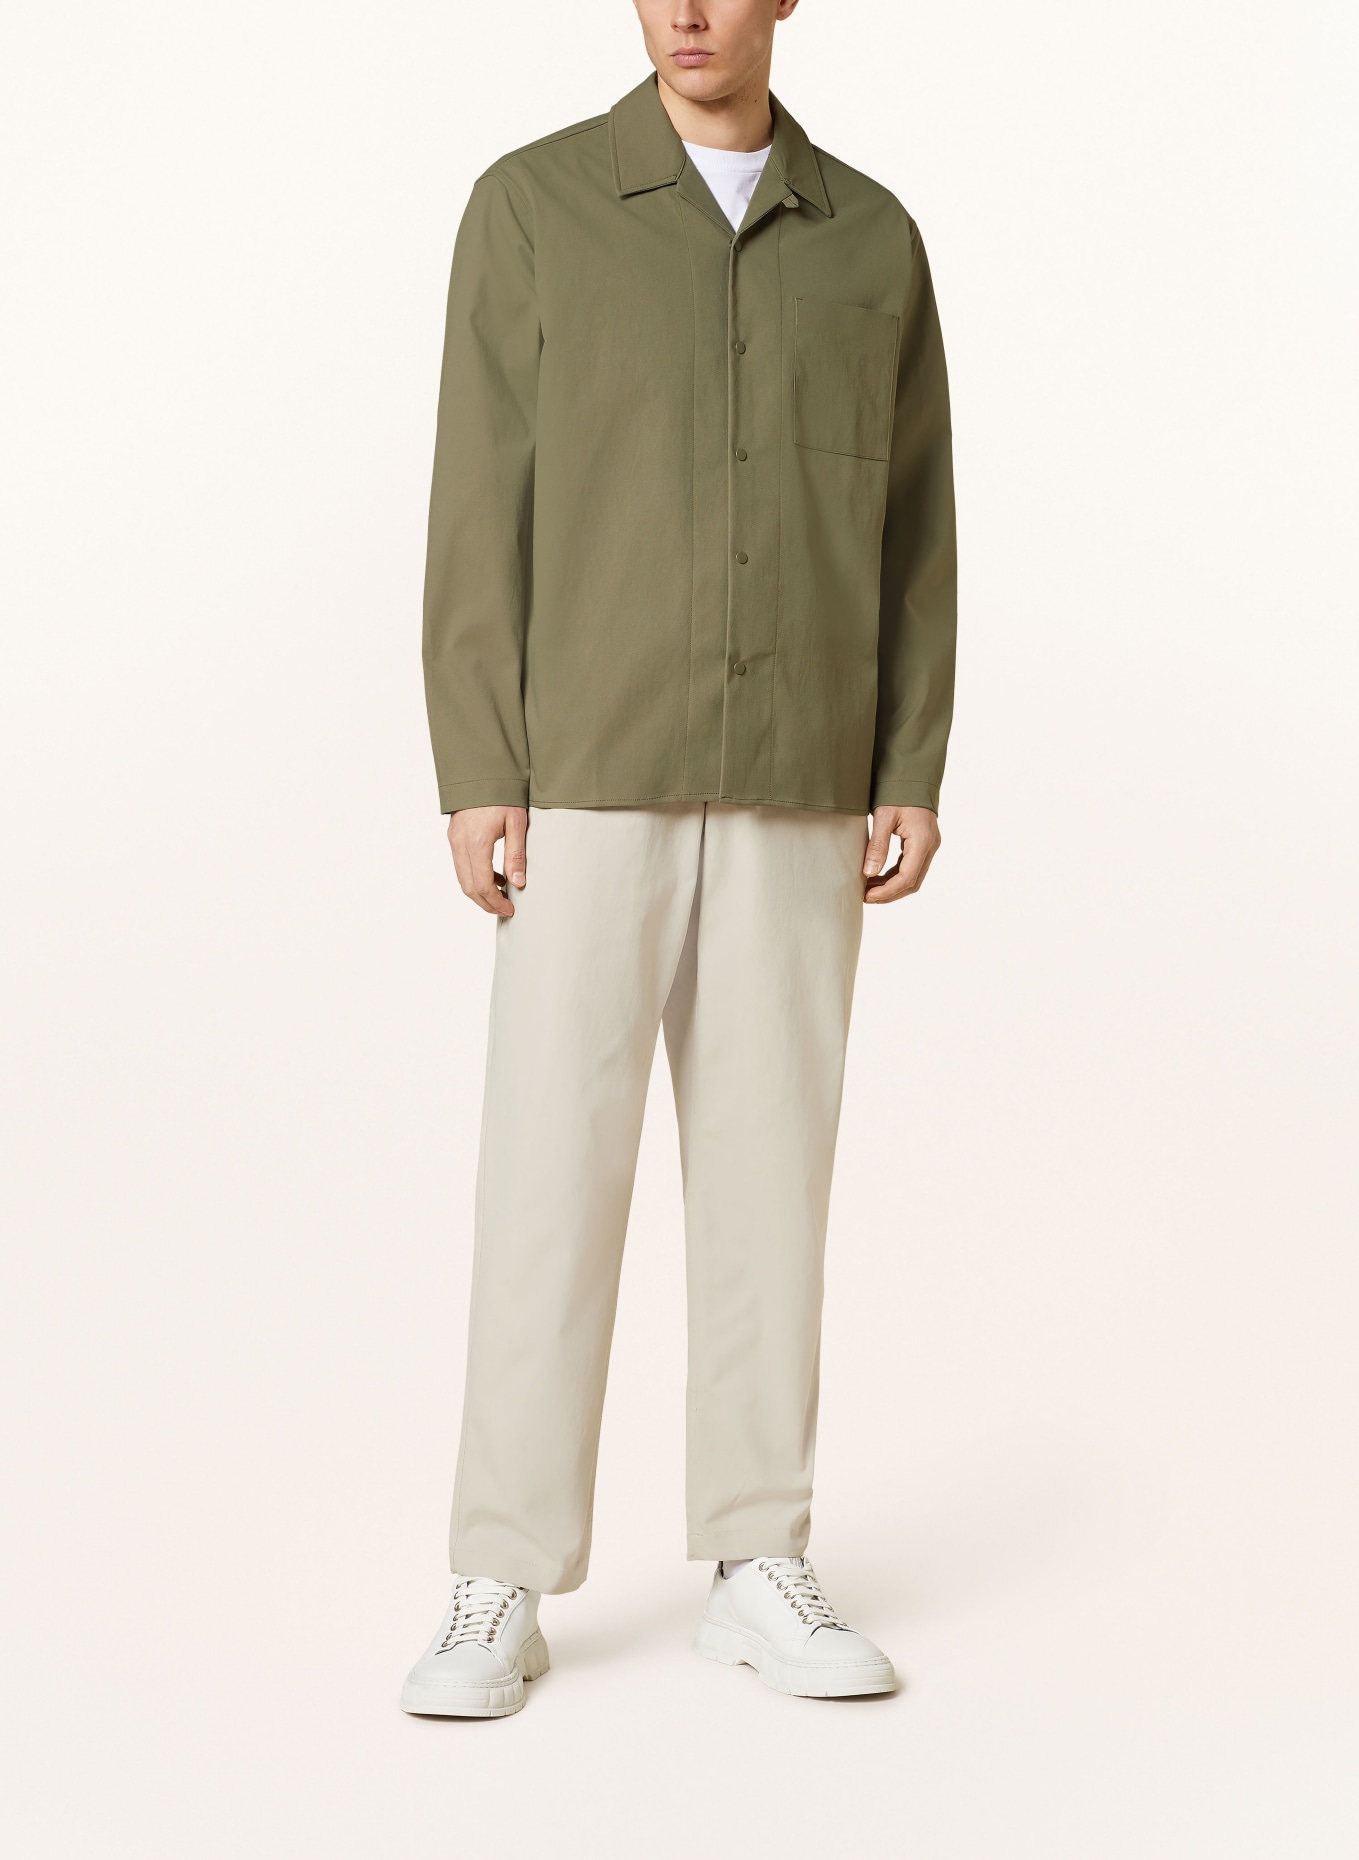 NORSE PROJECTS Overshirt CARSTEN, Farbe: OLIV (Bild 2)